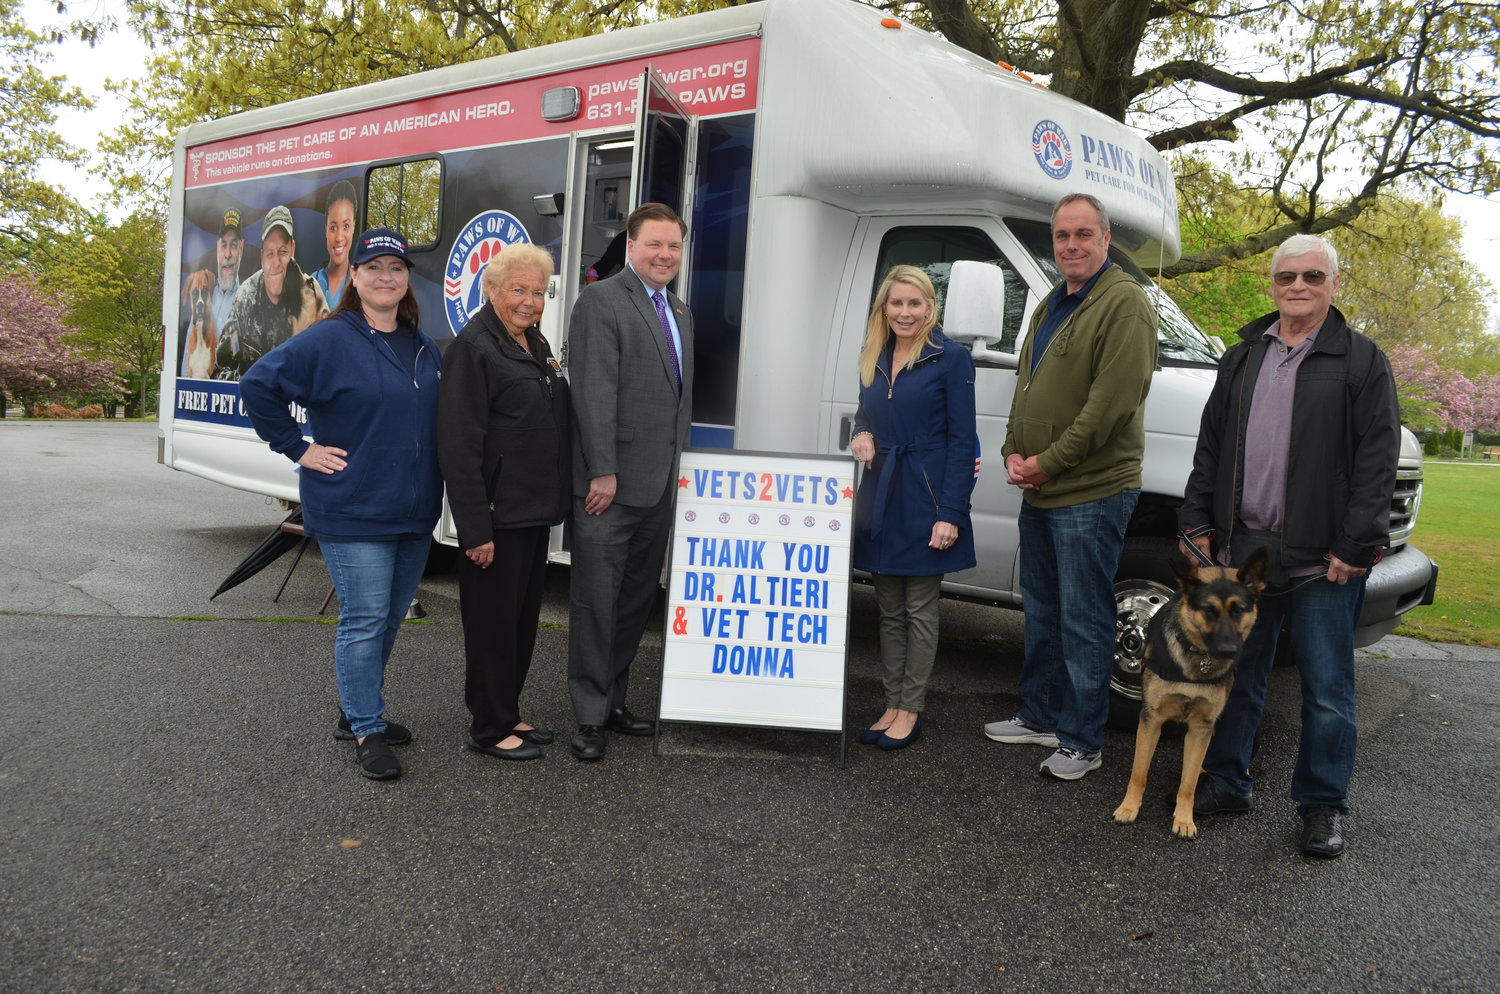 County Officials and Paws of War’s officials were ready at Eisenhower Park to help pets in need.